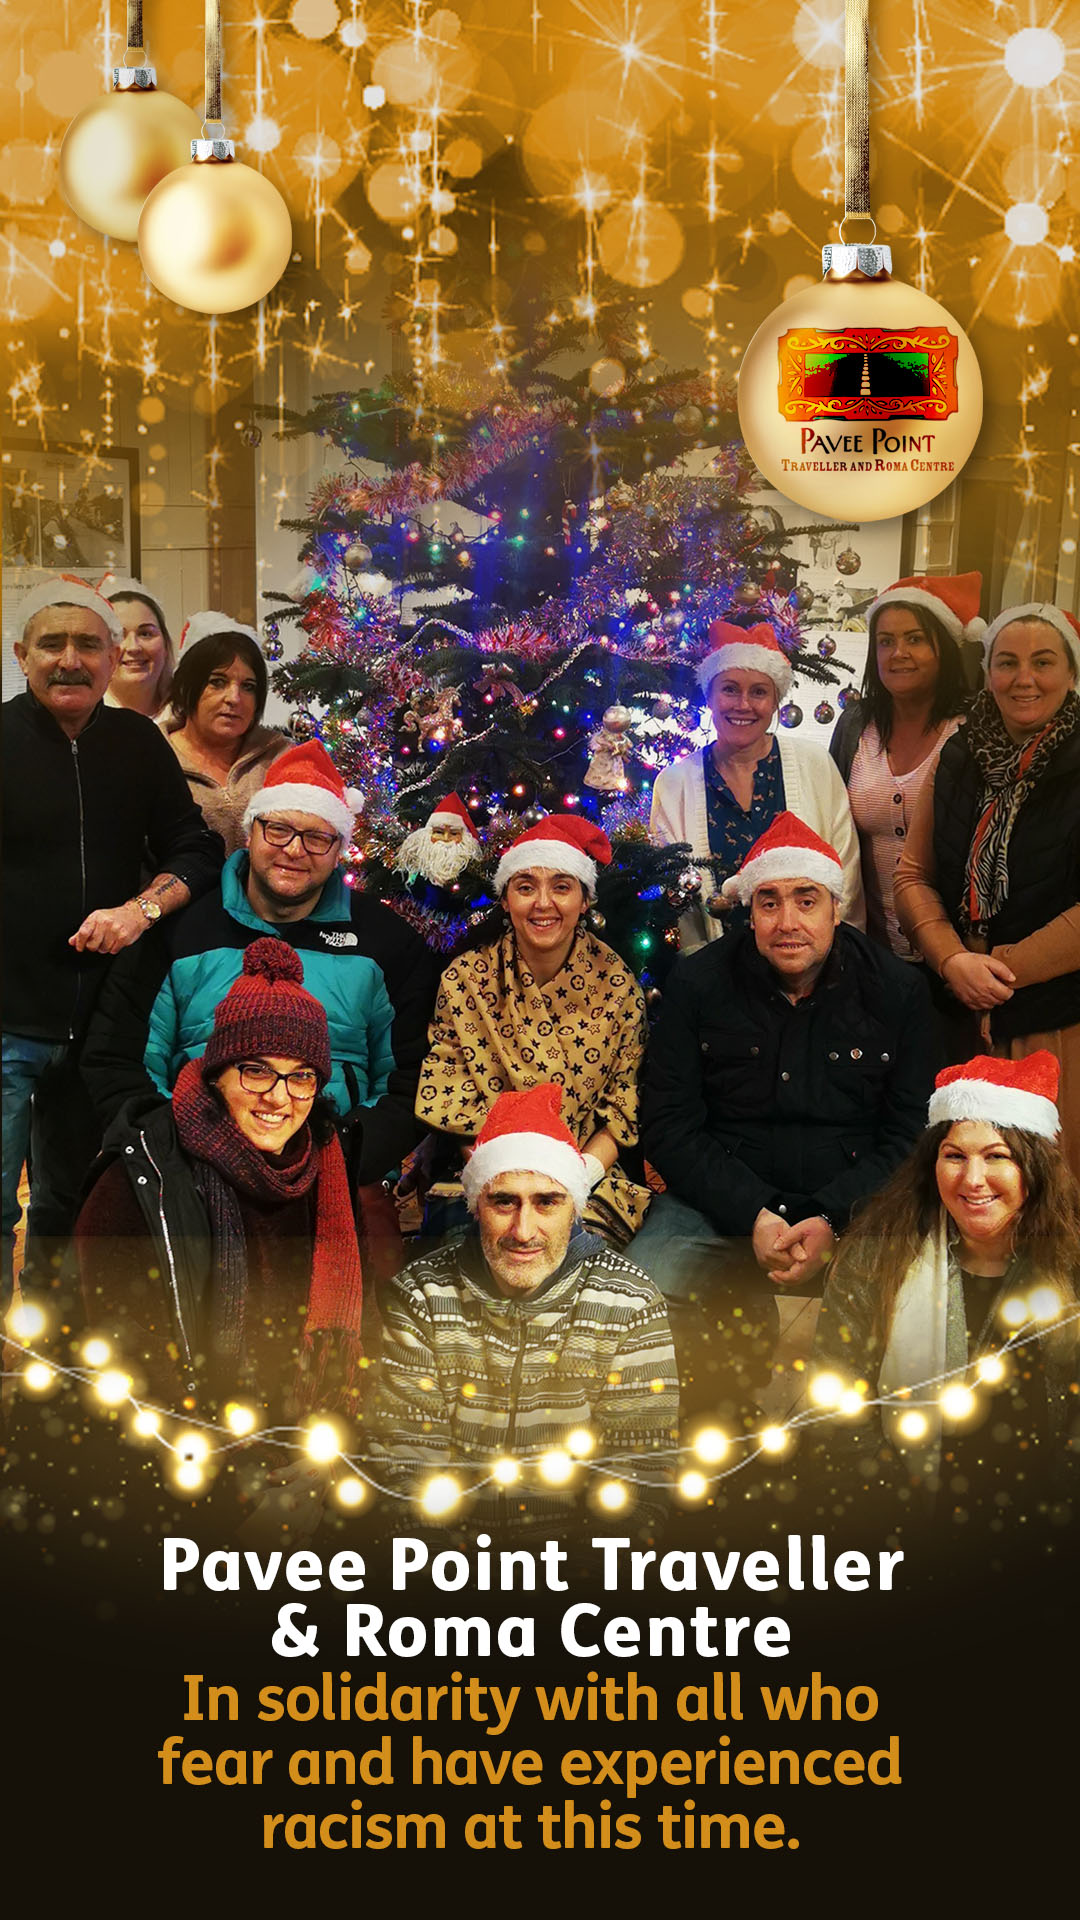 Seasons Greetings from Pavee Point Traveller & Roma Centre